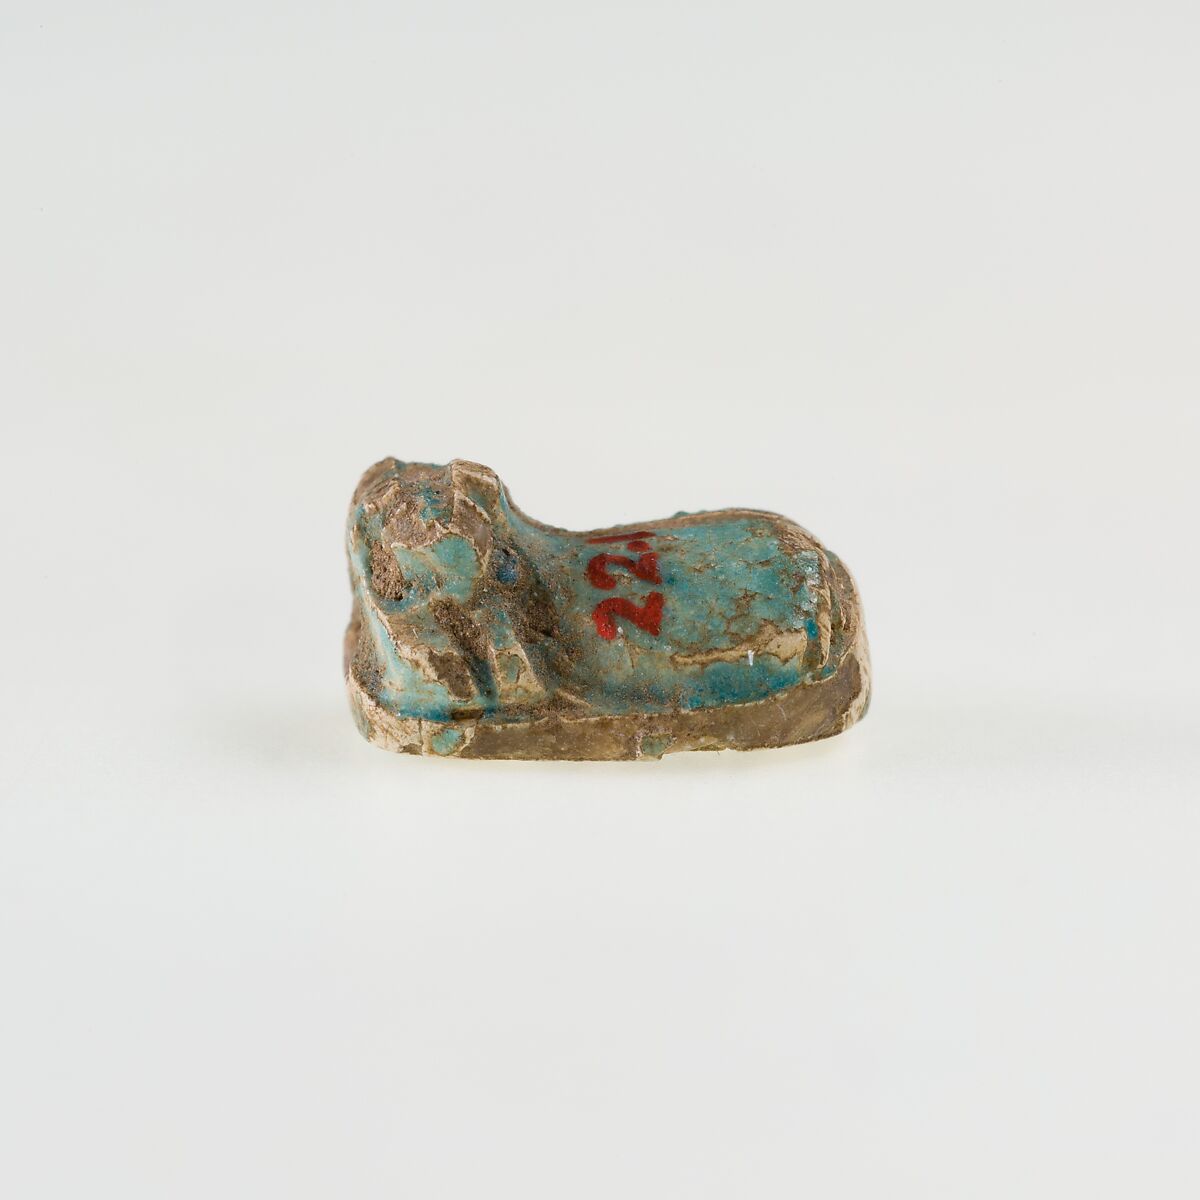 Animal-shaped Amulet Inscribed with a Blessing Related to Re, Green glazed steatite 